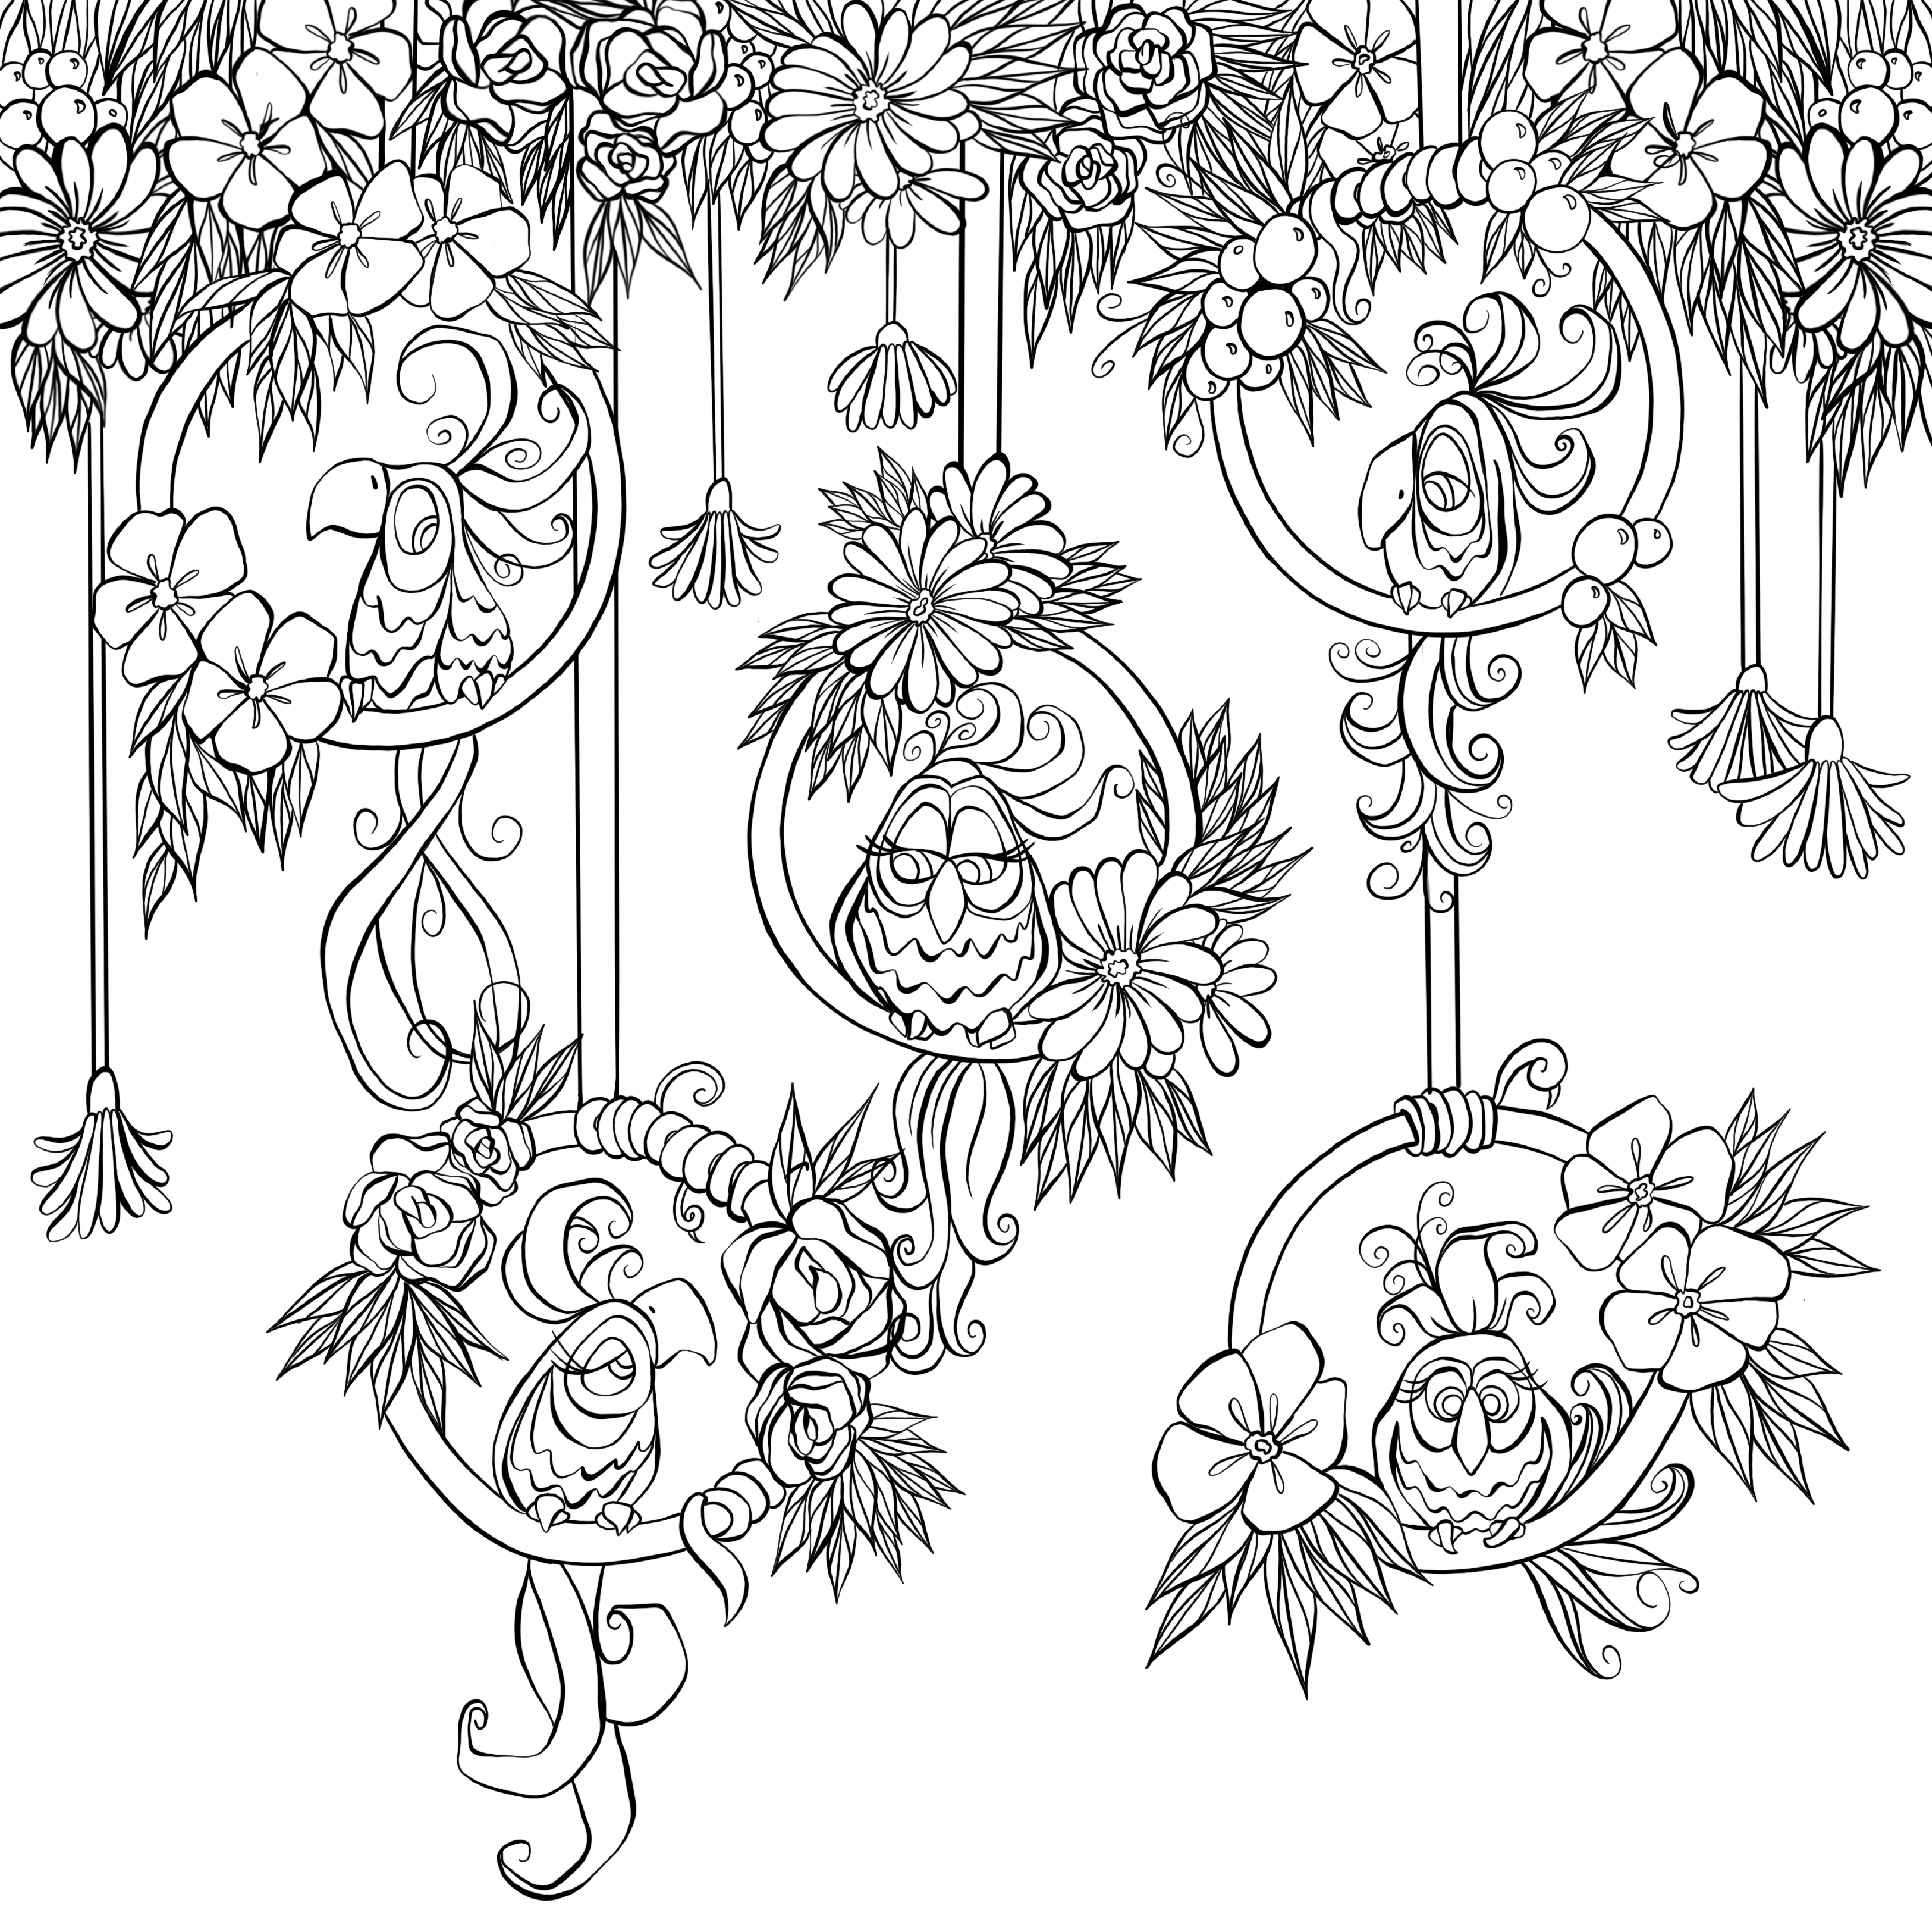 Zendoodle Coloring Presents: Birds in the Forest